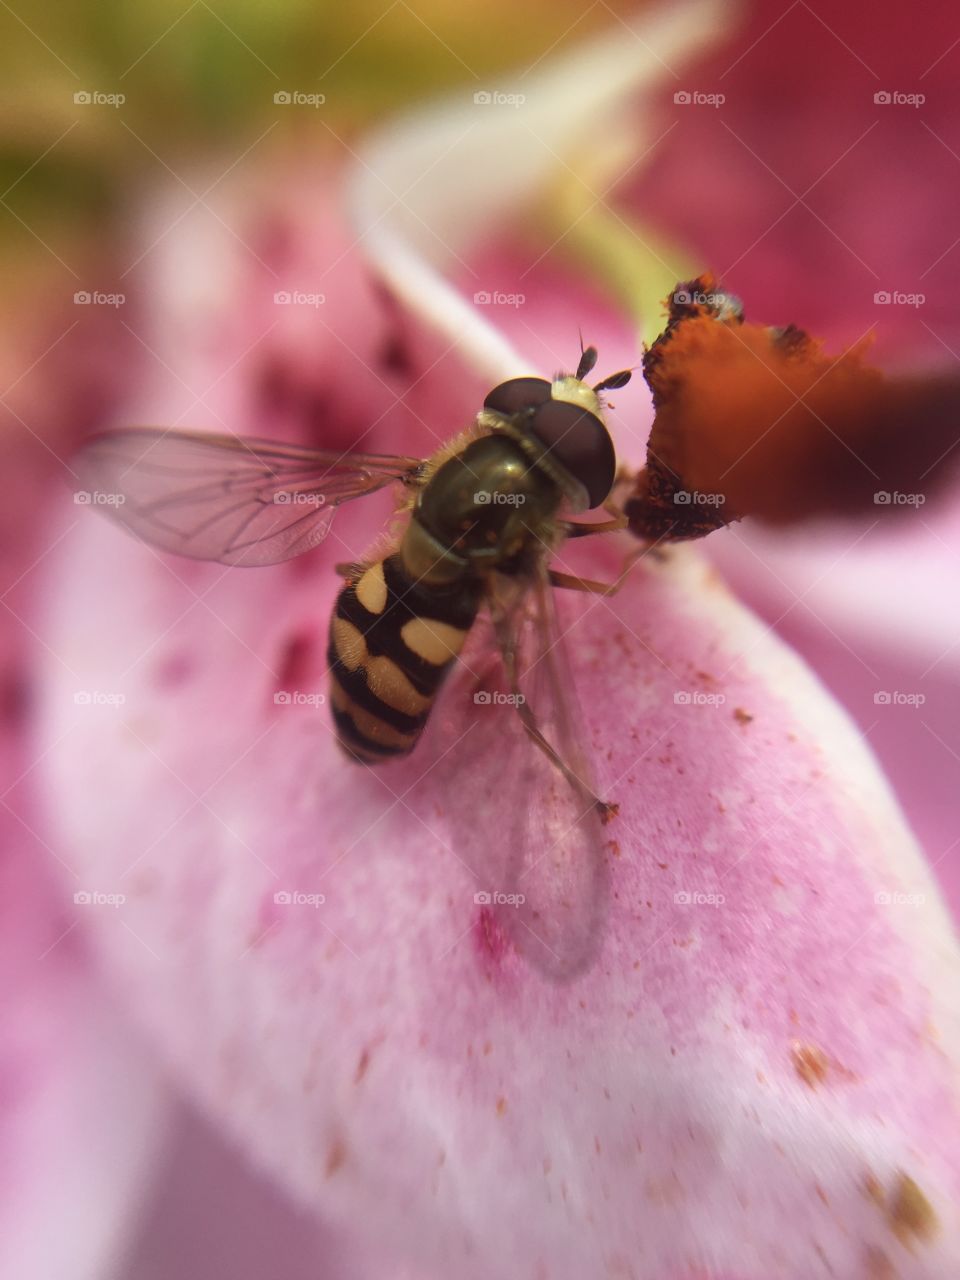 Meal time for the hover fly 